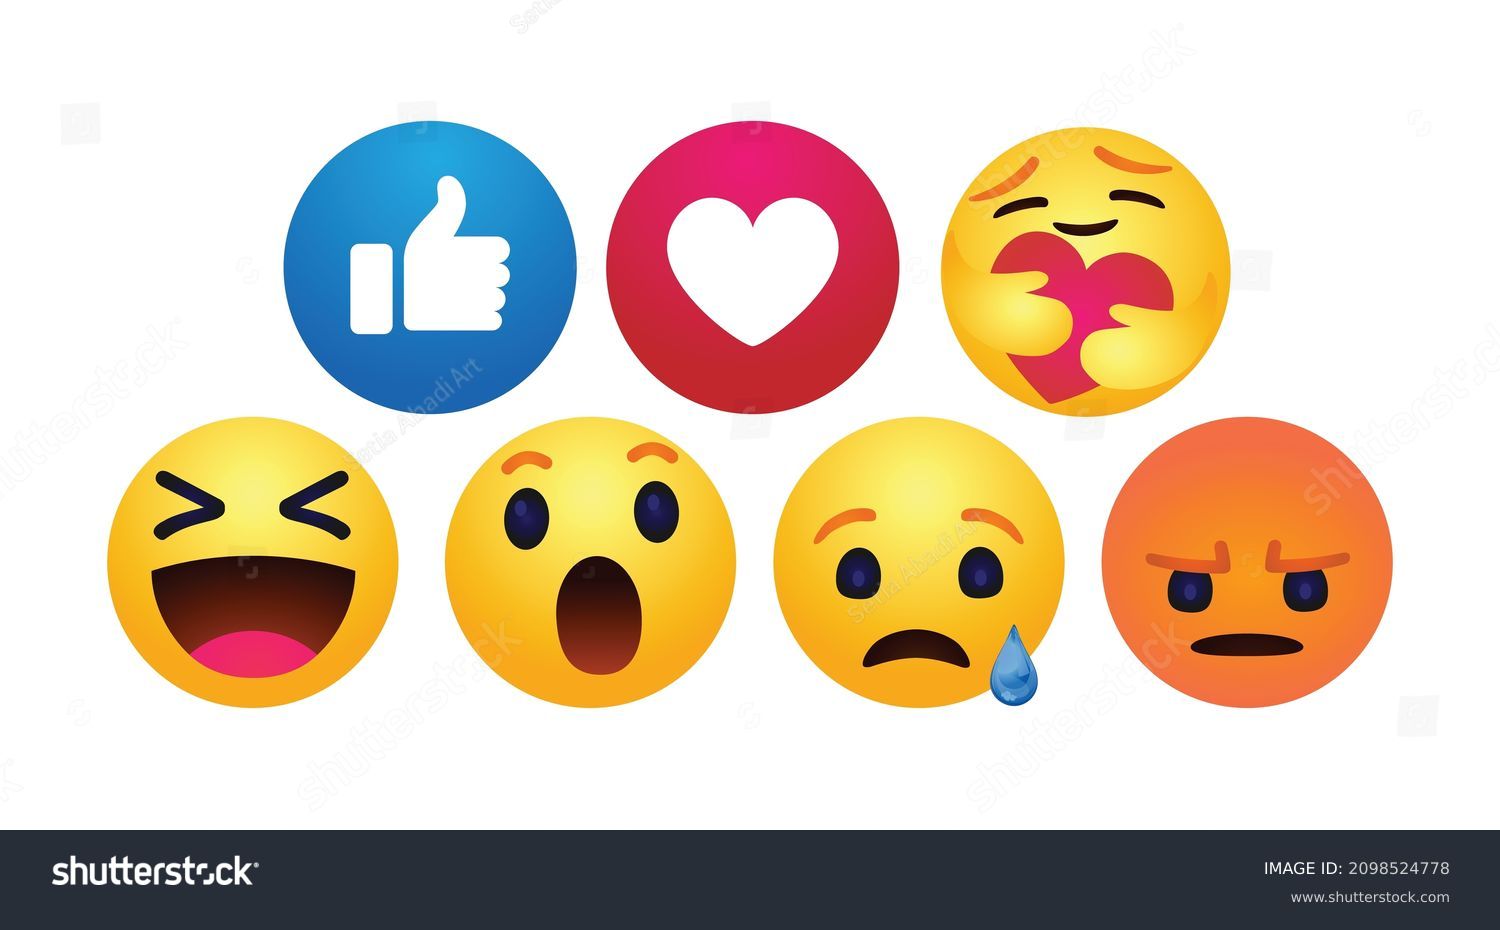 SVG of high quality vector round yellow cartoon bubble emoticons comment social media Facebook chat comment reactions, icon template face tear, smile sad, hug love like, Lol, laughter emoji character message svg